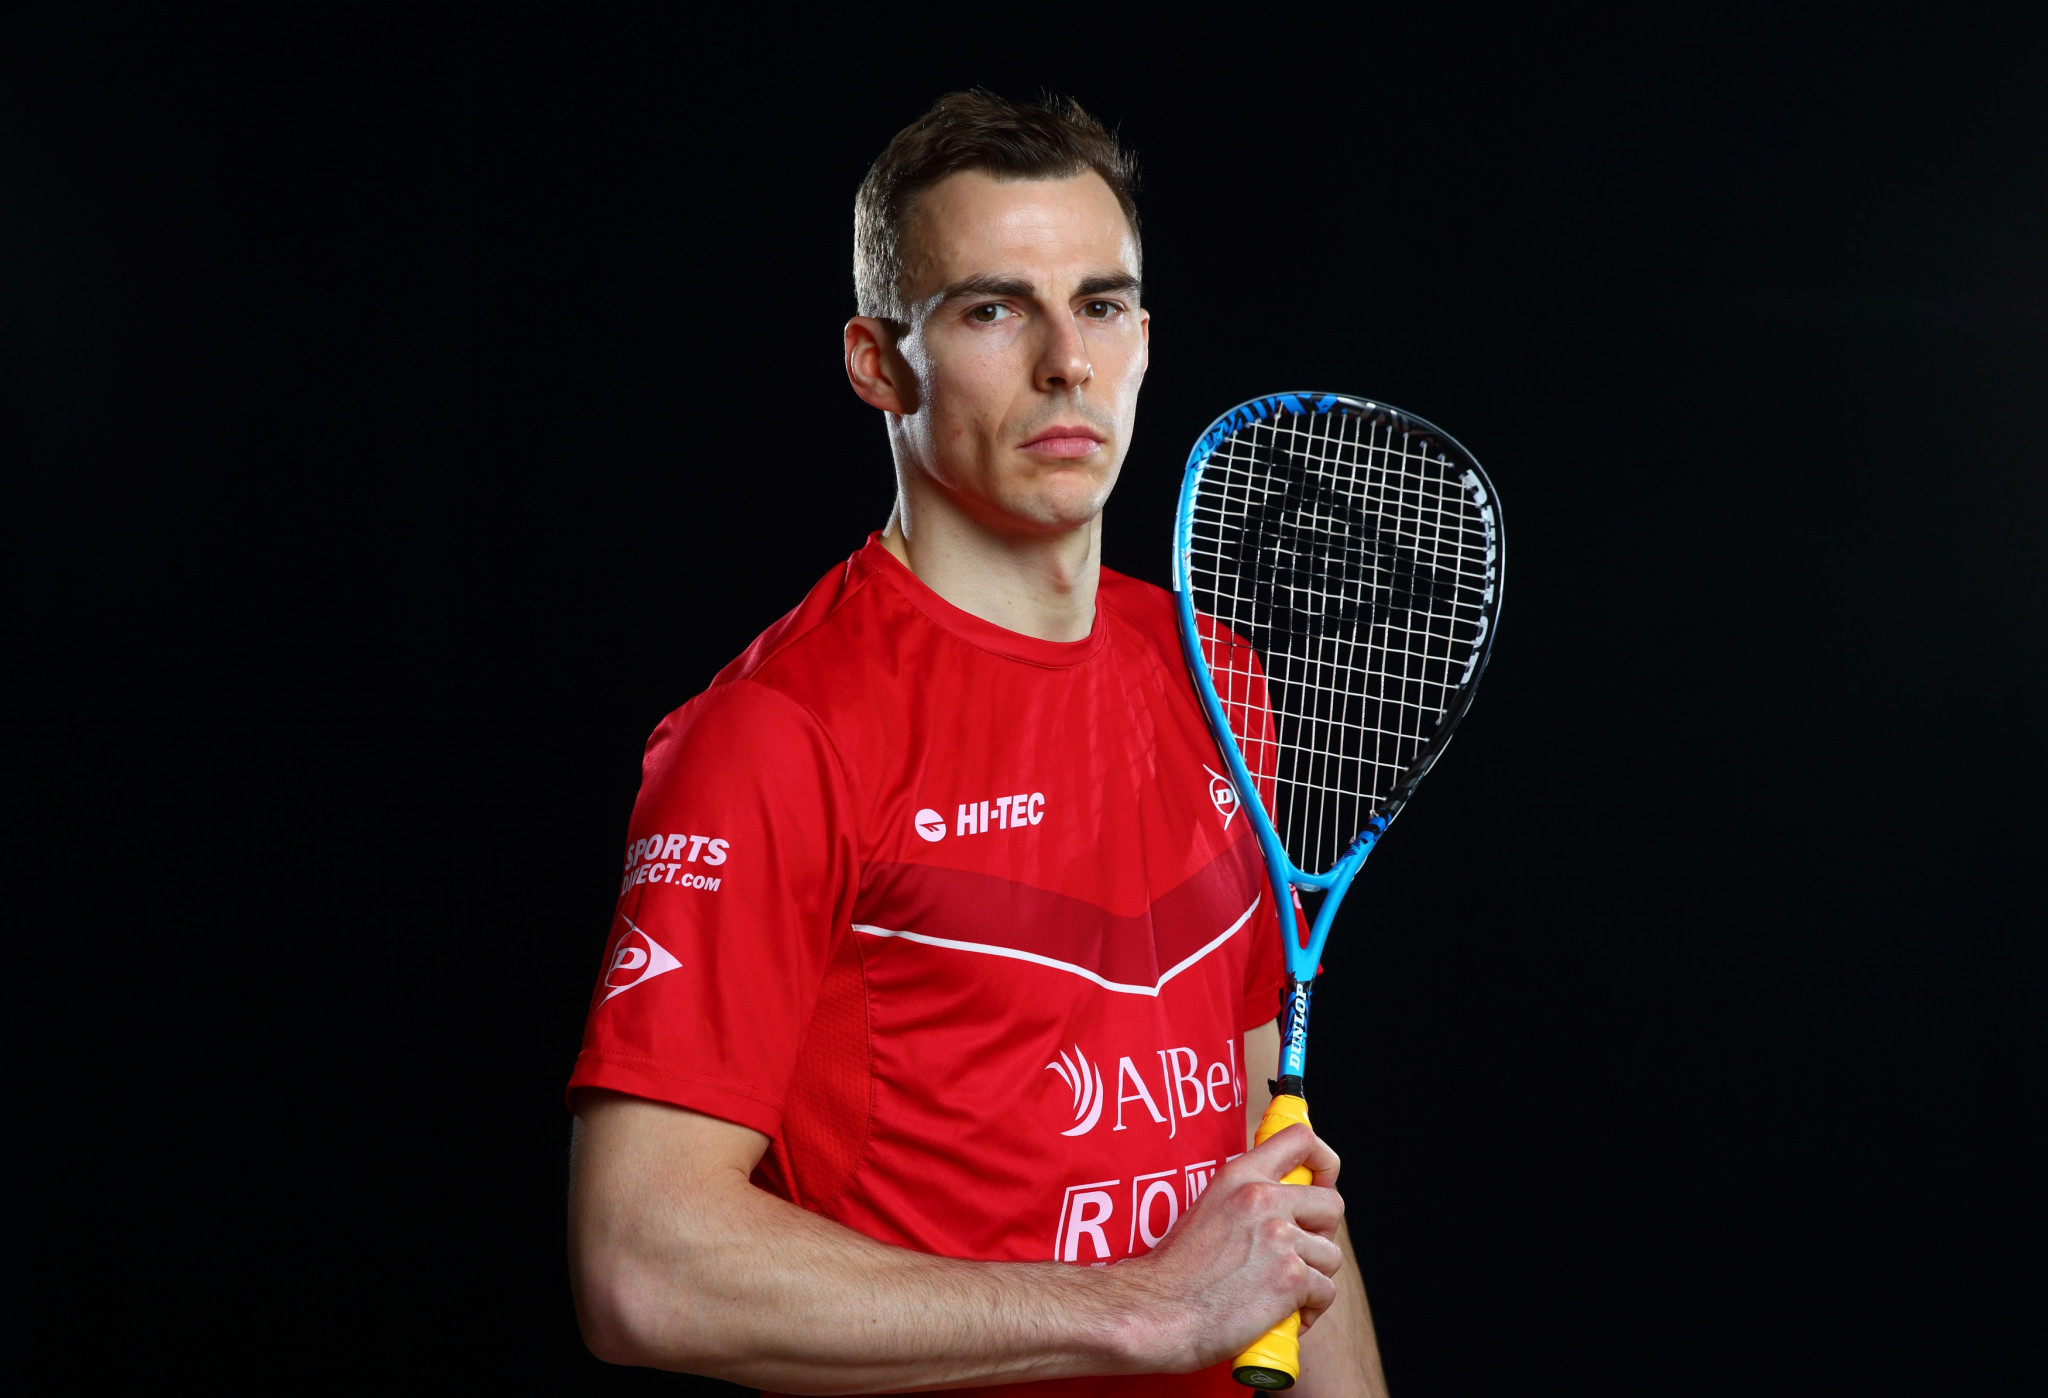 England’s Nick Matthew will begin his last year in squash before retirement by playing in a star-studded exhibition evening at the British Junior Open in Birmingham ©Getty Images